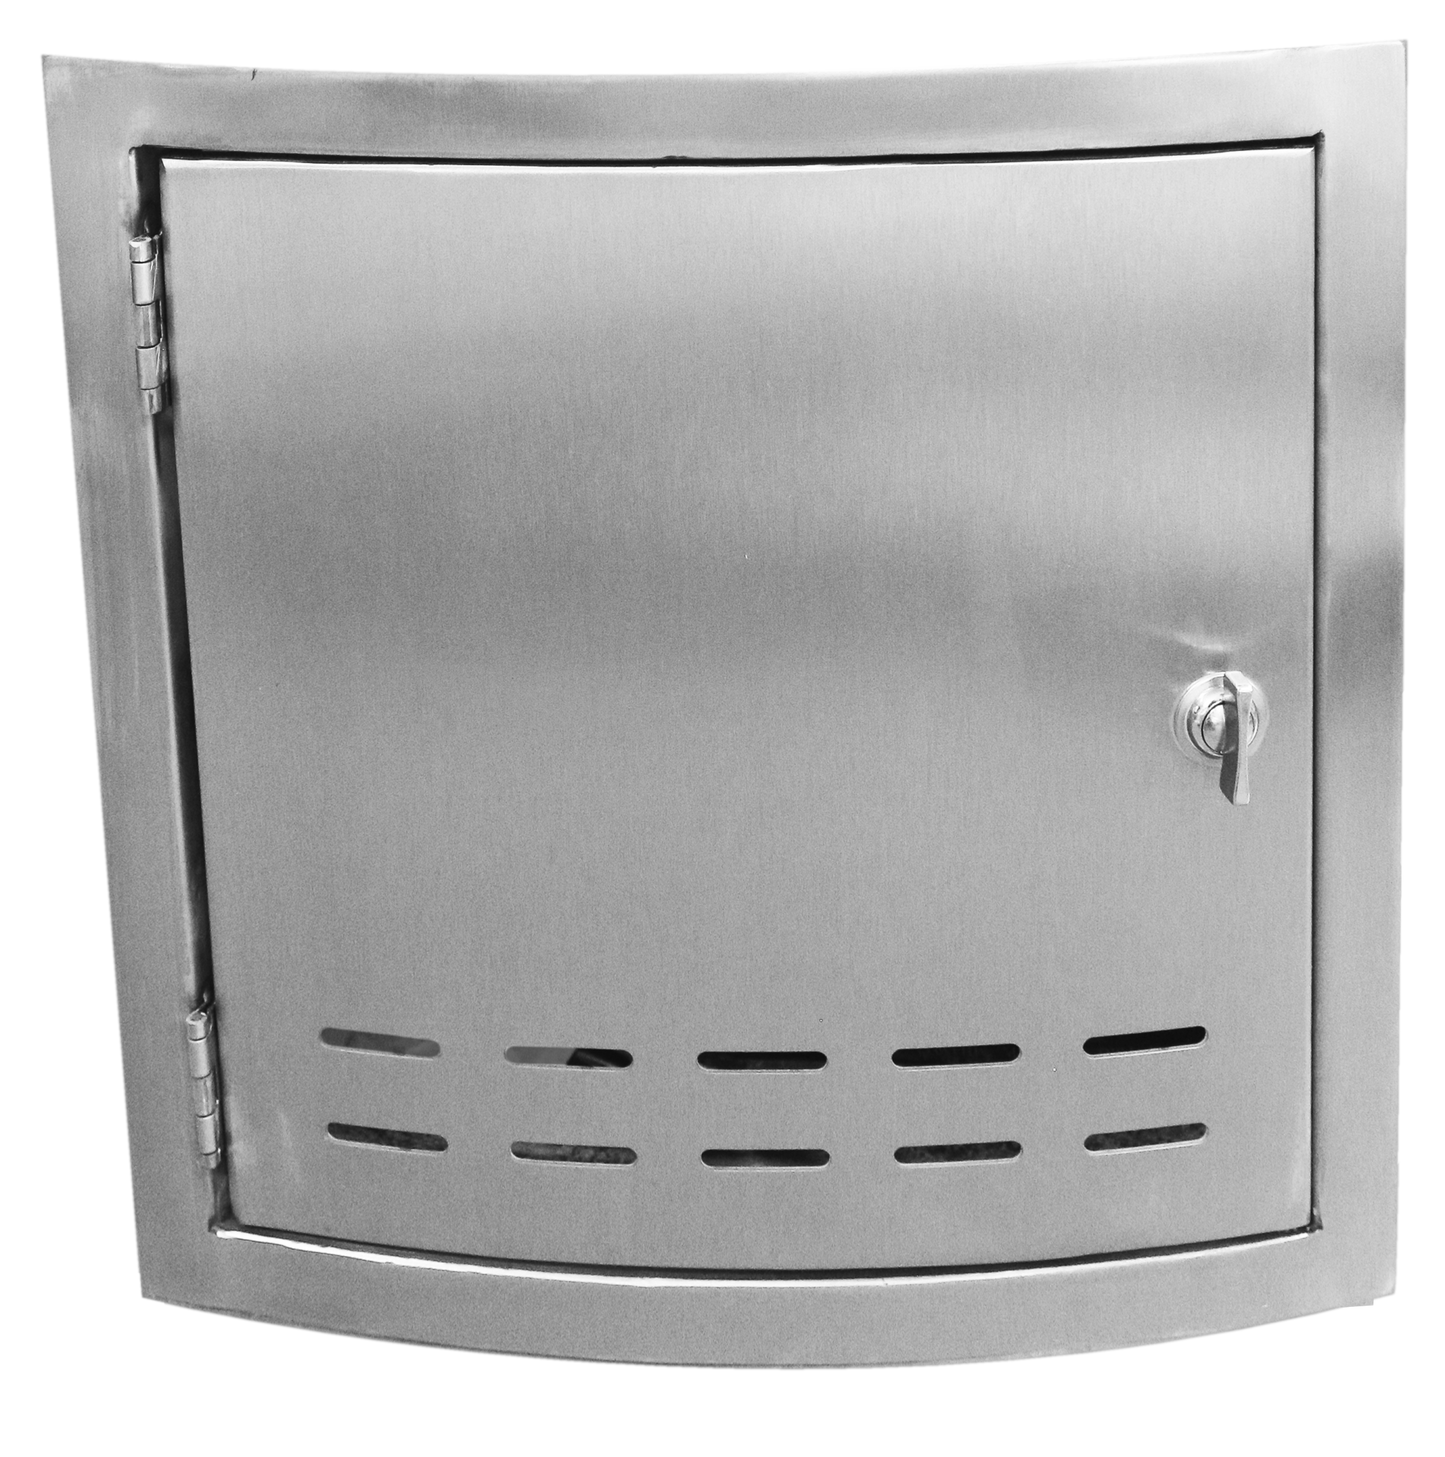 The Outdoor Plus 8" x 8" Stainless Steel Access Door for 20lb. Propane Tank